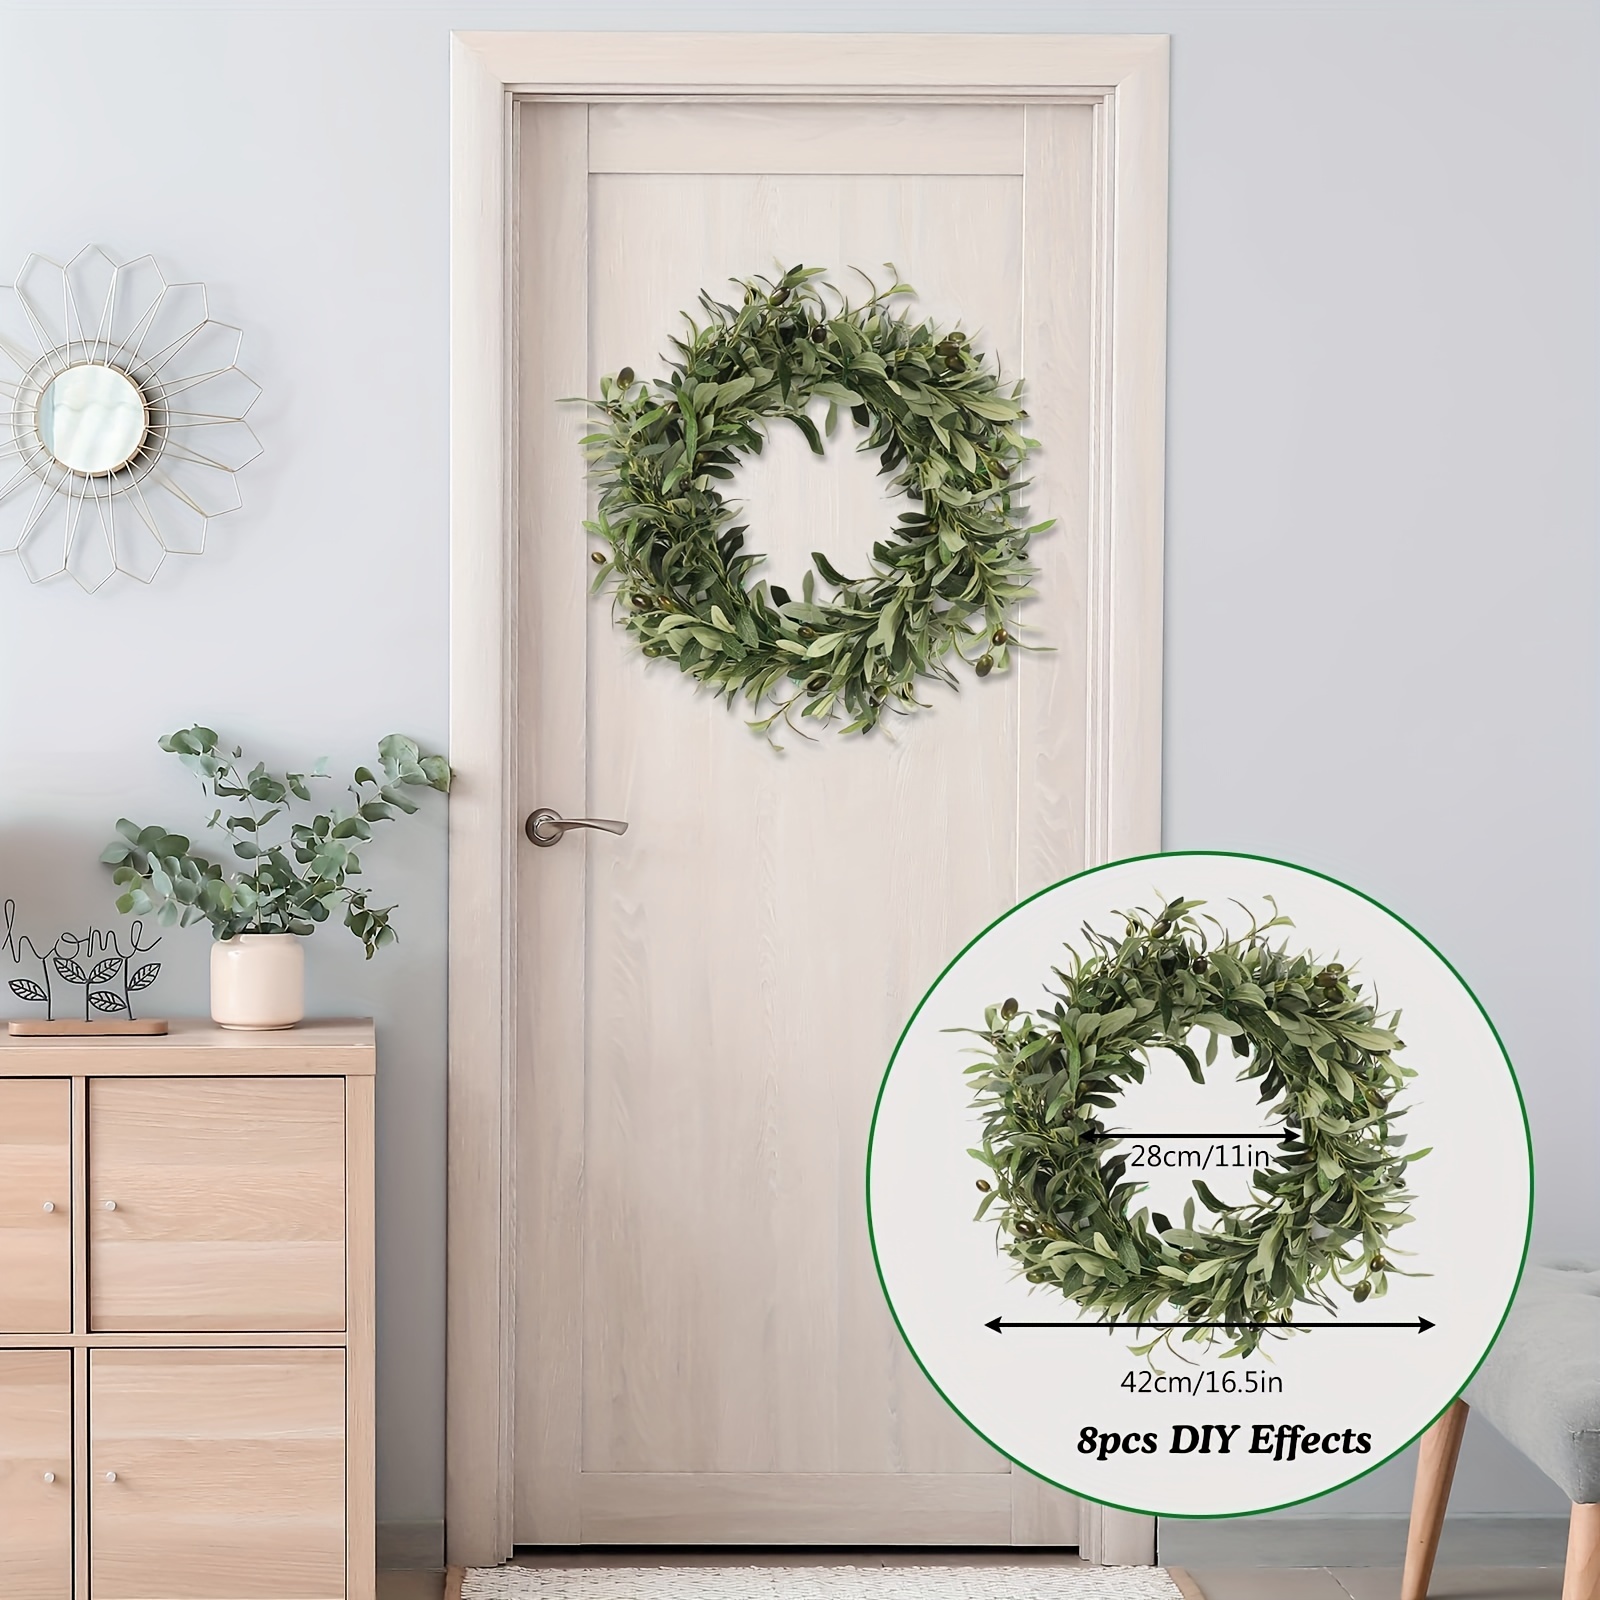 The Olive Branch Wreath & Garland